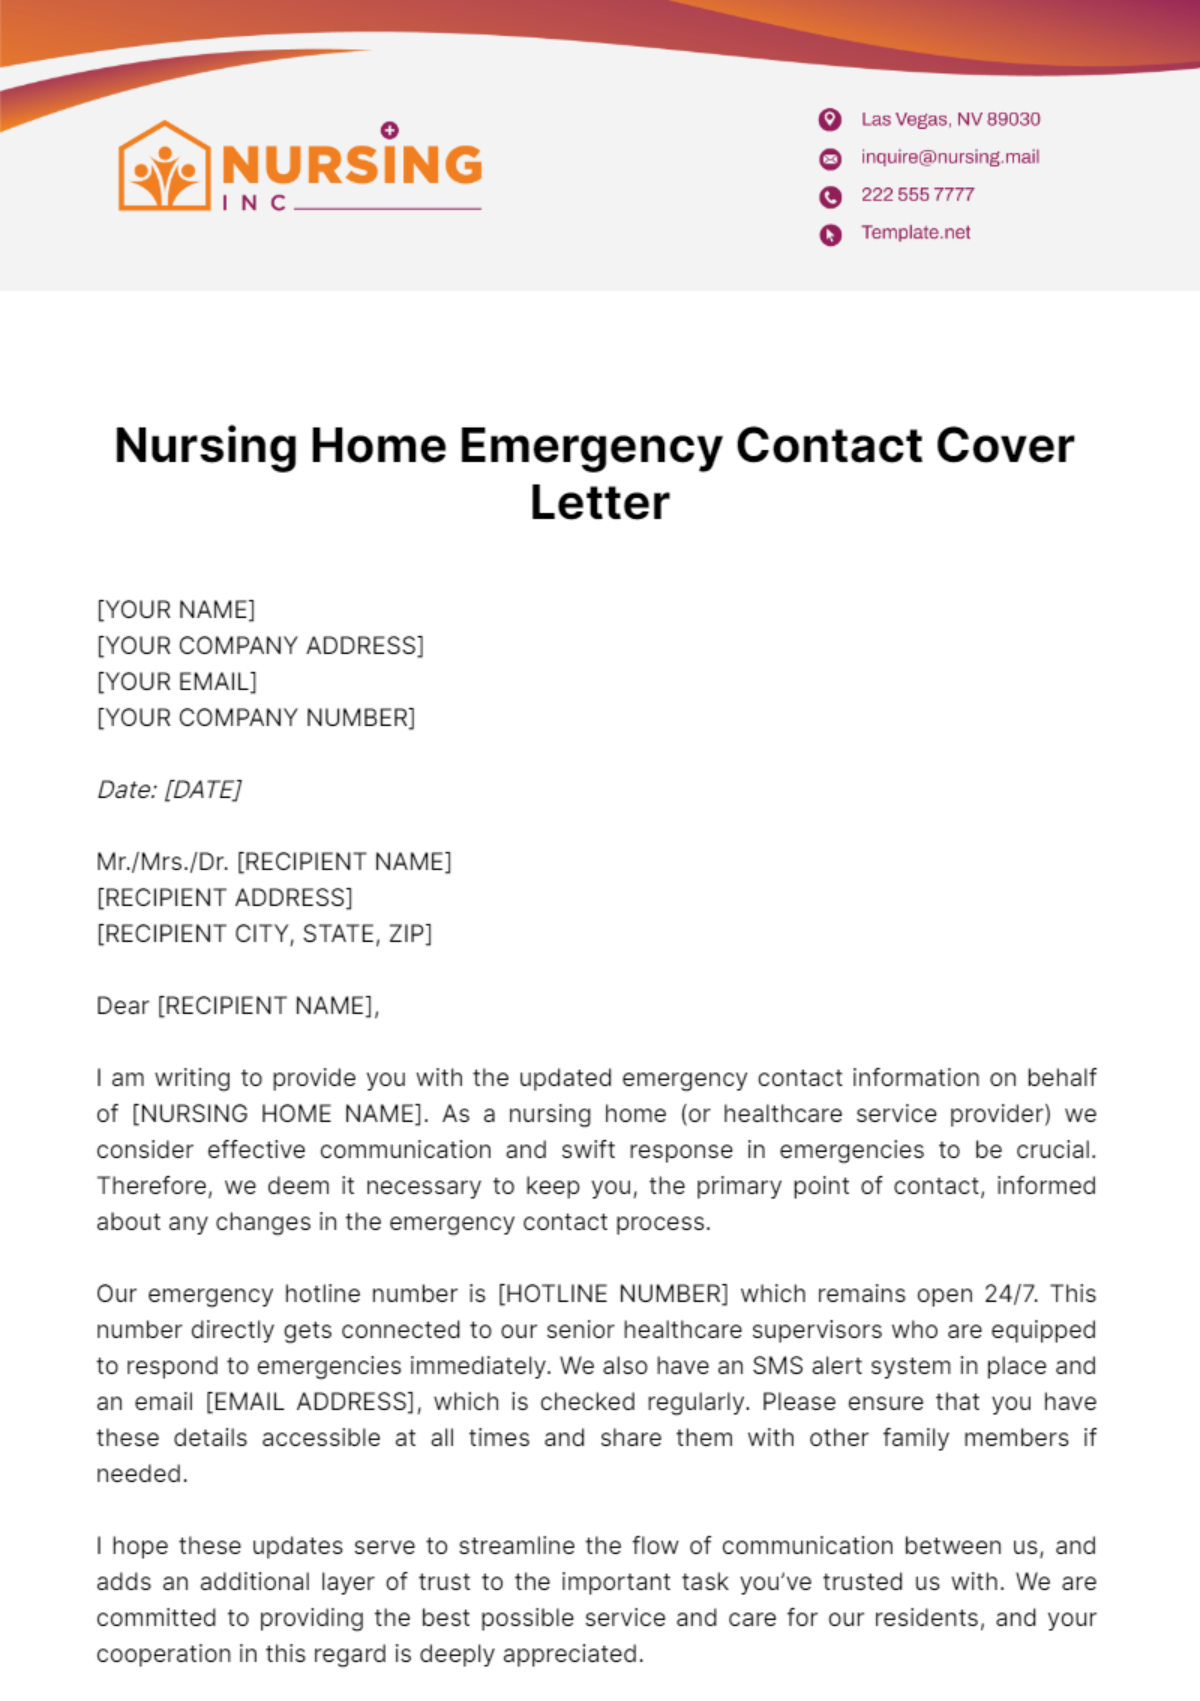 Nursing Home Emergency Contact Cover Letter Template